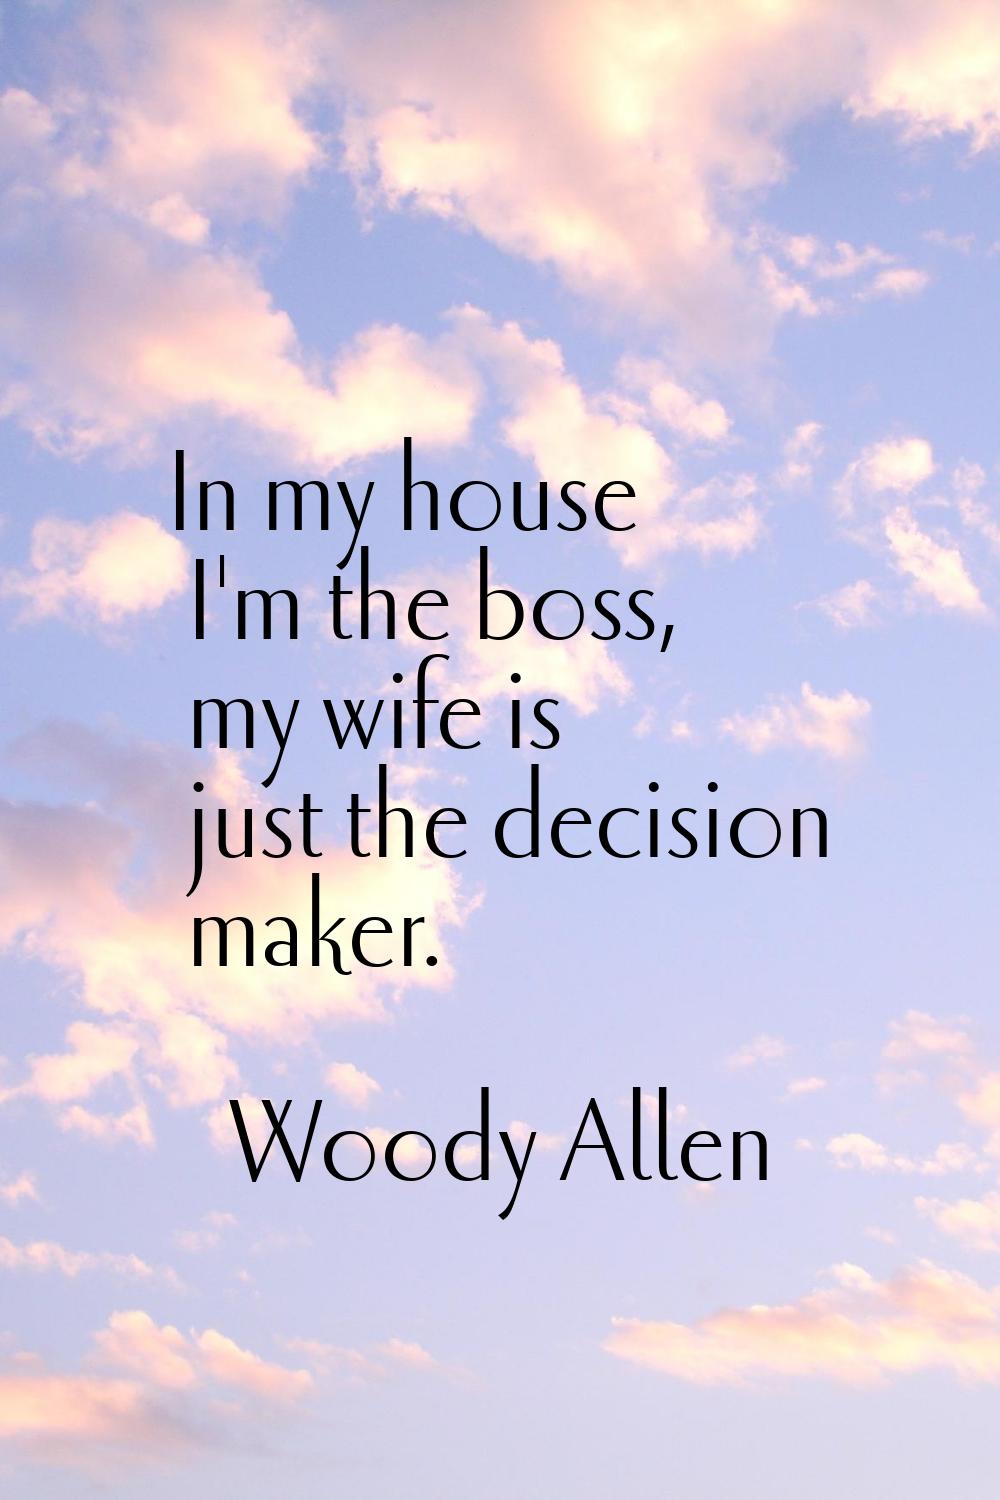 In my house I'm the boss, my wife is just the decision maker.